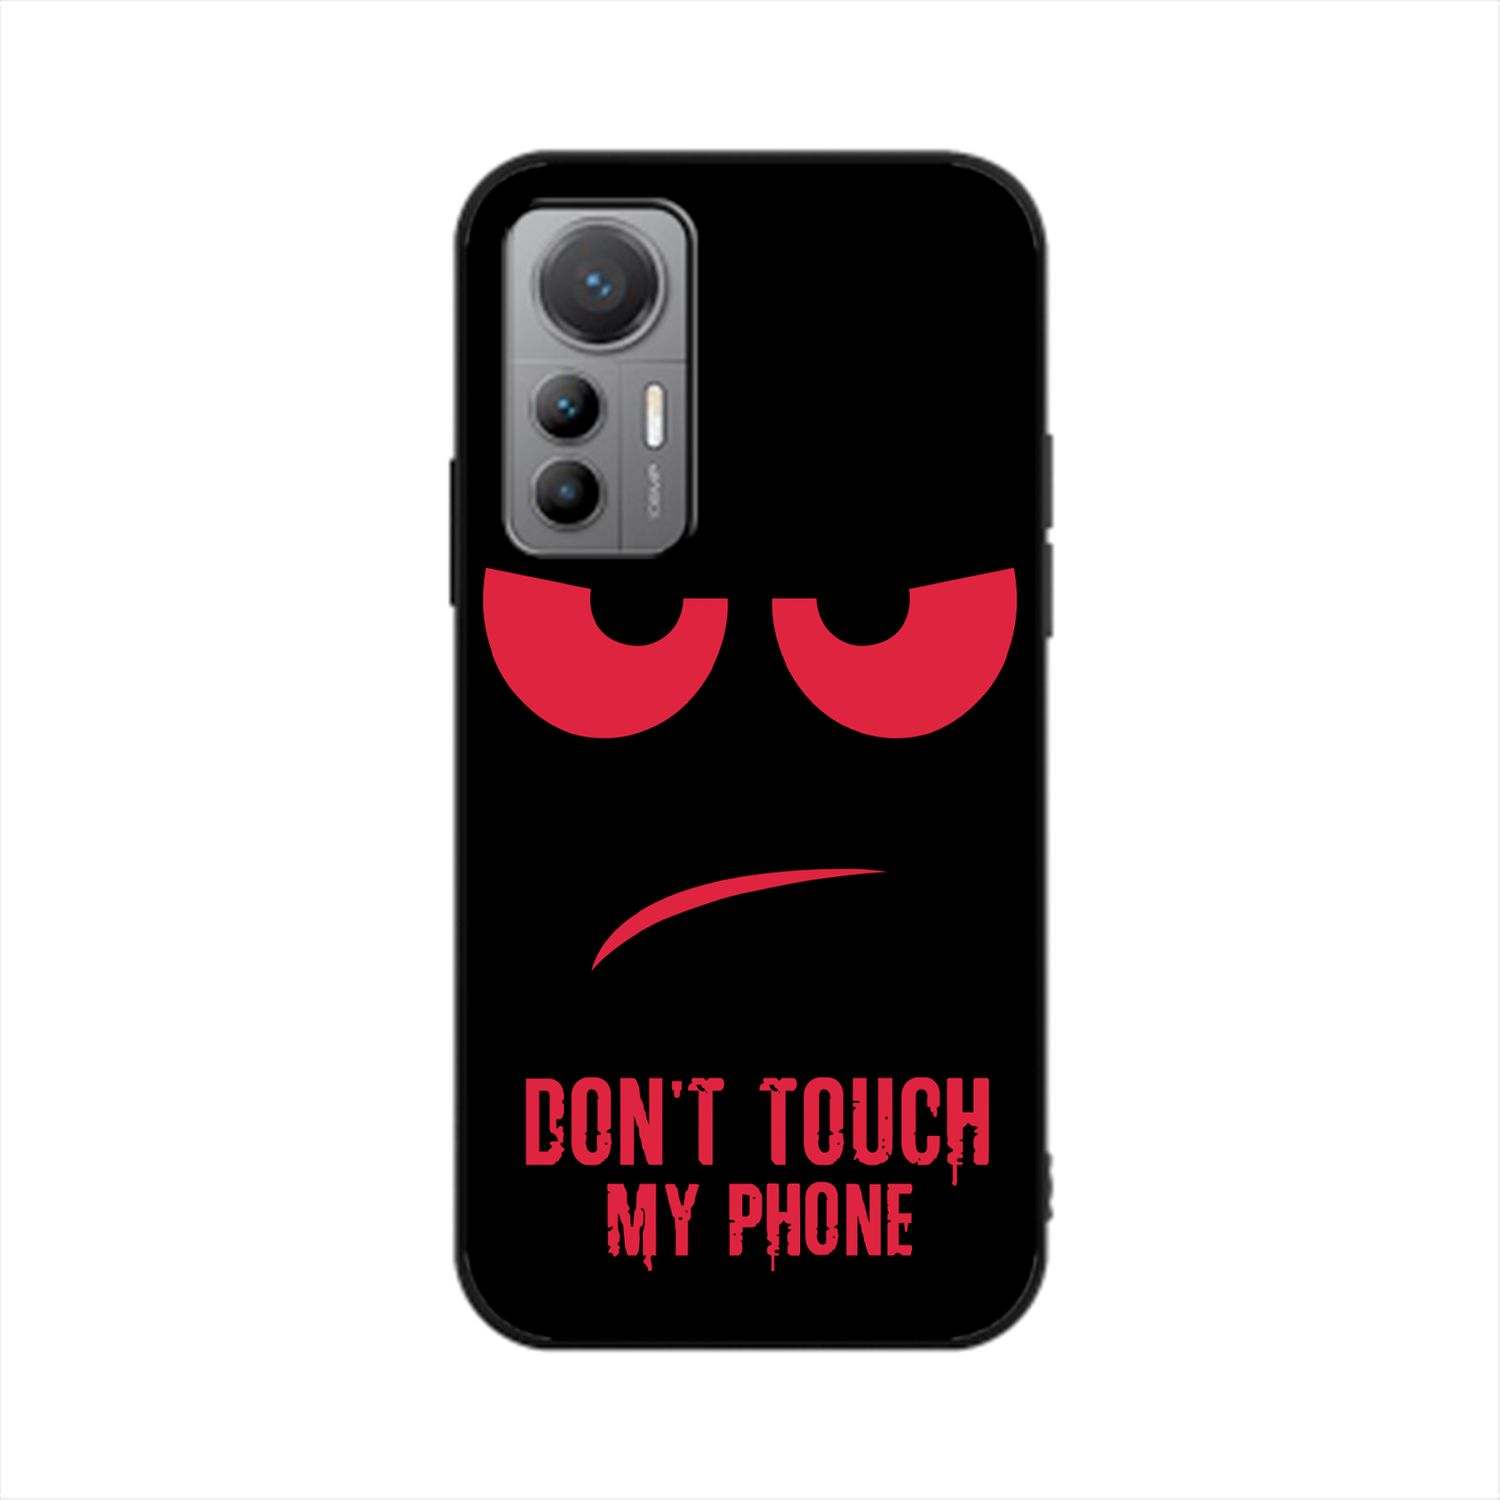 Backcover, Rot DESIGN My Phone Touch 12 Xiaomi, KÖNIG Dont Case, Lite,